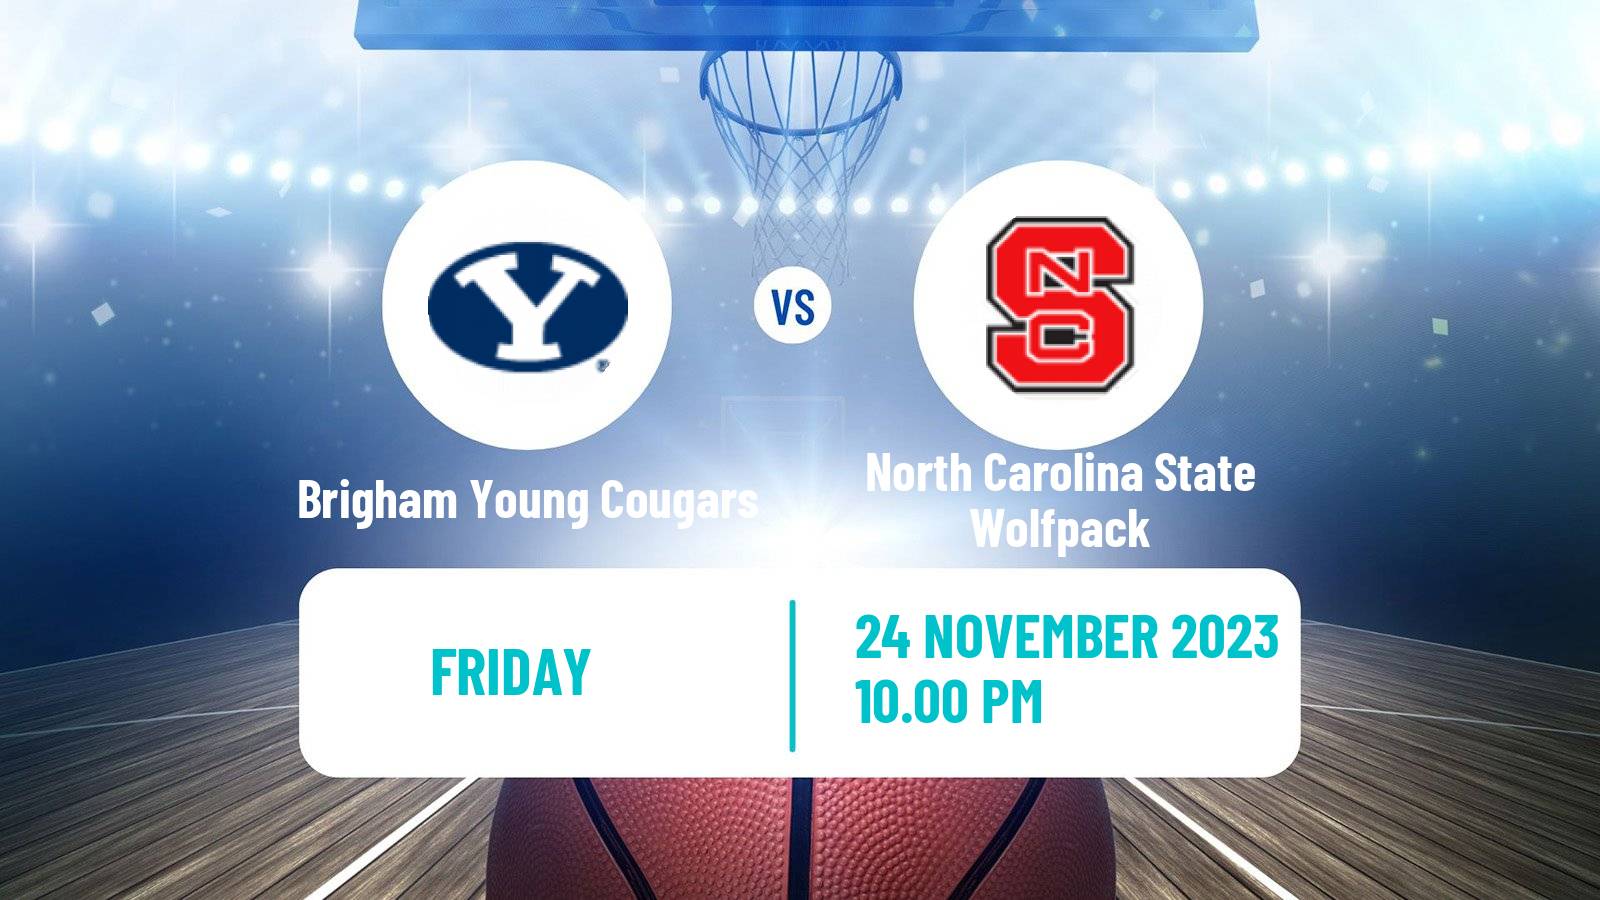 Basketball NCAA College Basketball Brigham Young Cougars - North Carolina State Wolfpack